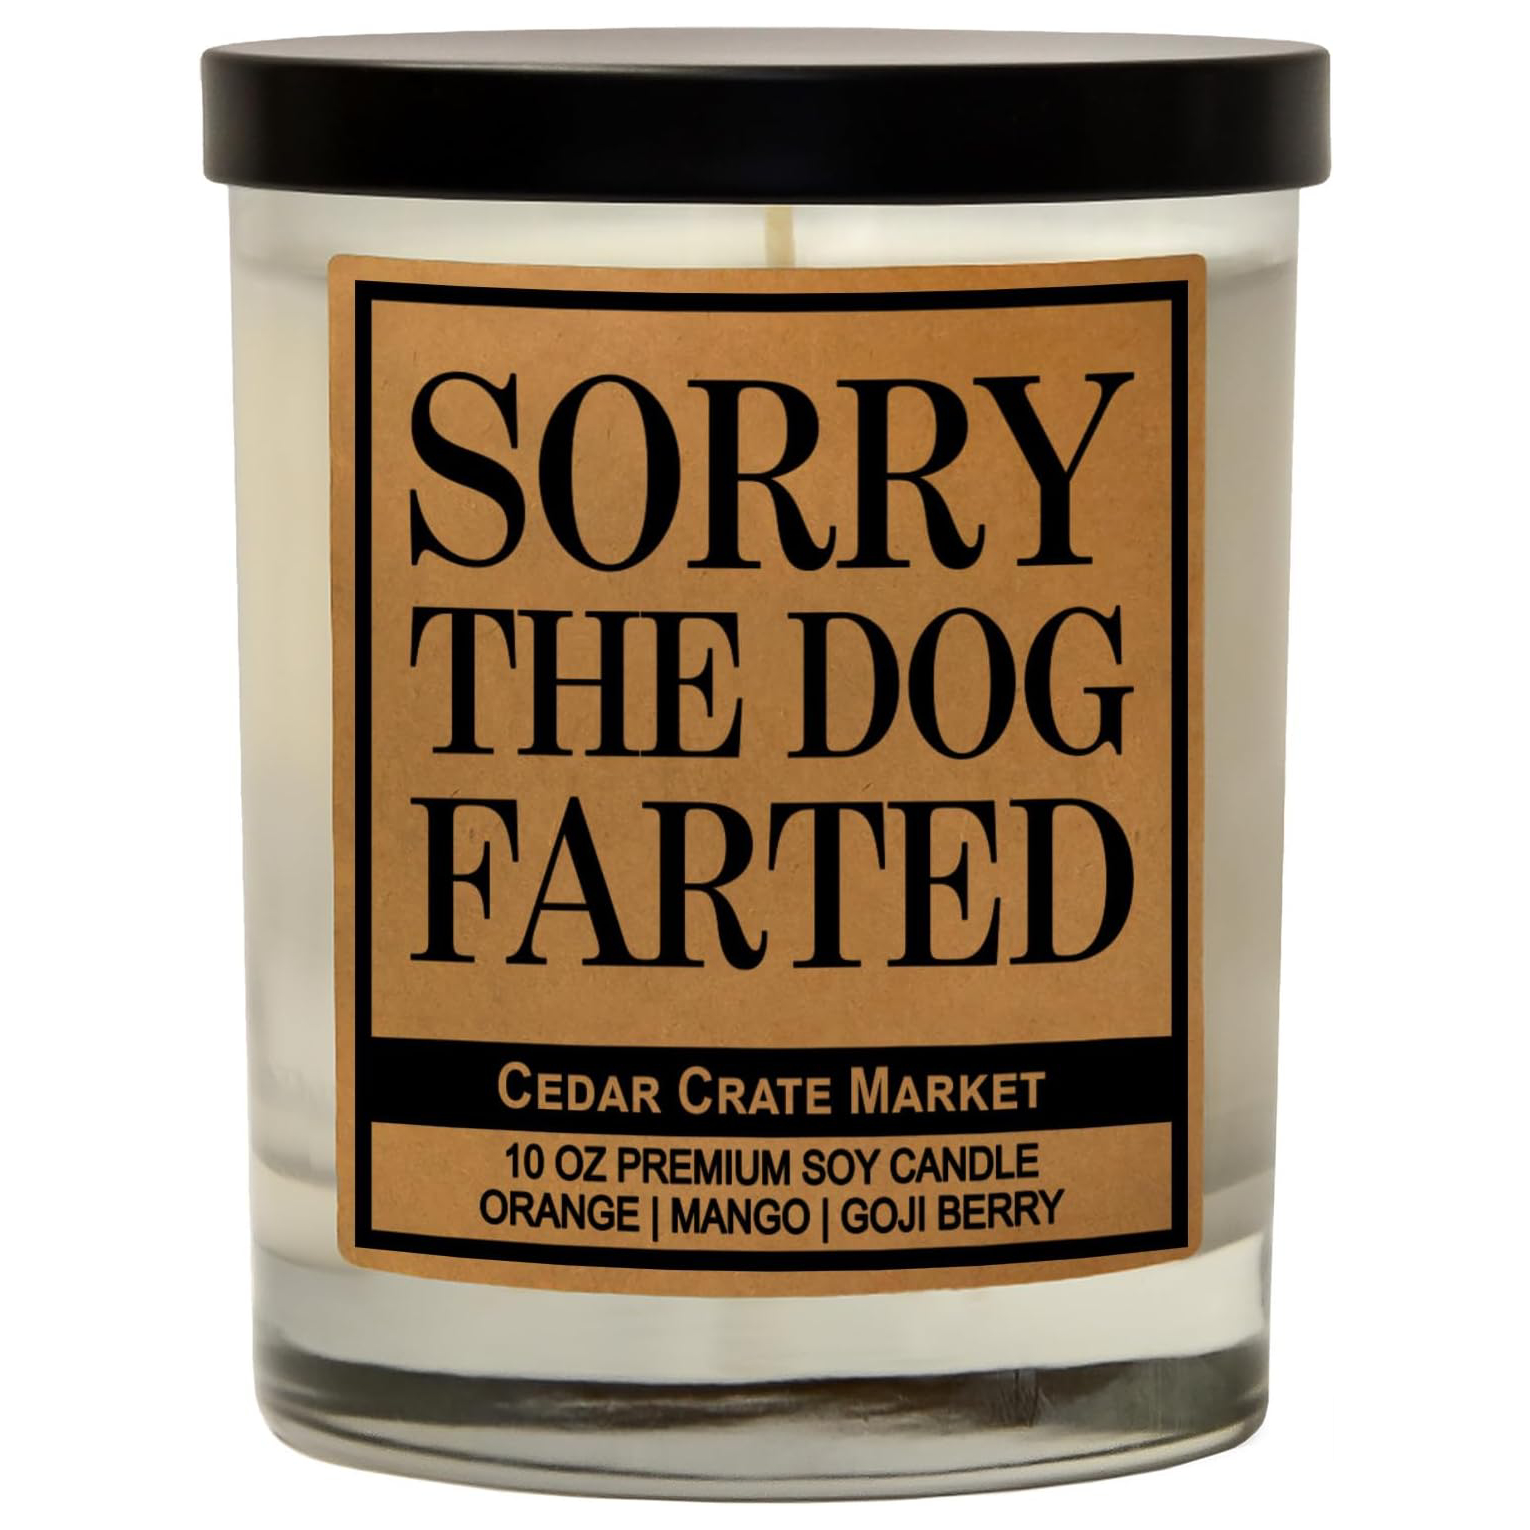 “Sorry, the Dog Farted” Candle new